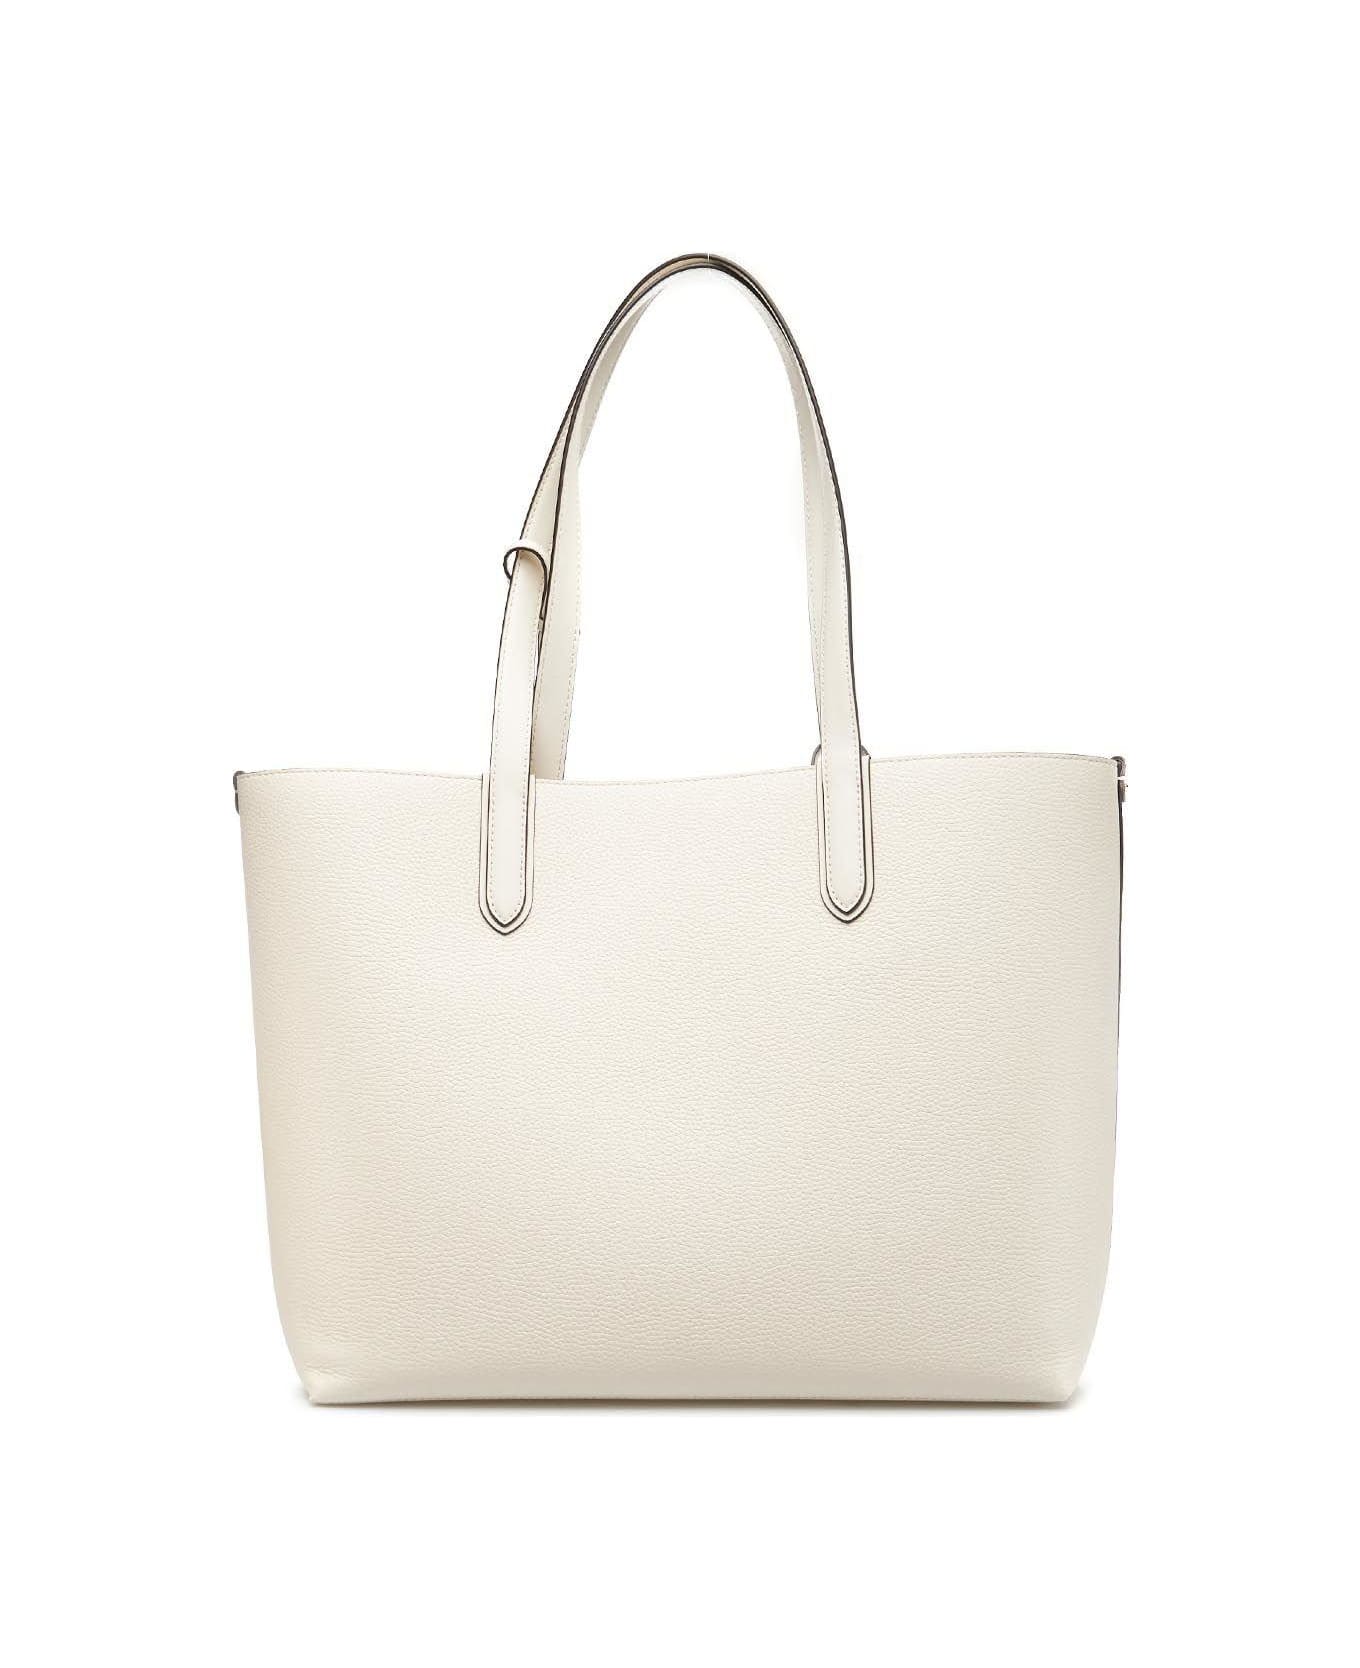 Michael Kors Collection Eliza Reversible Extra-large Tote Bag - Light Cream